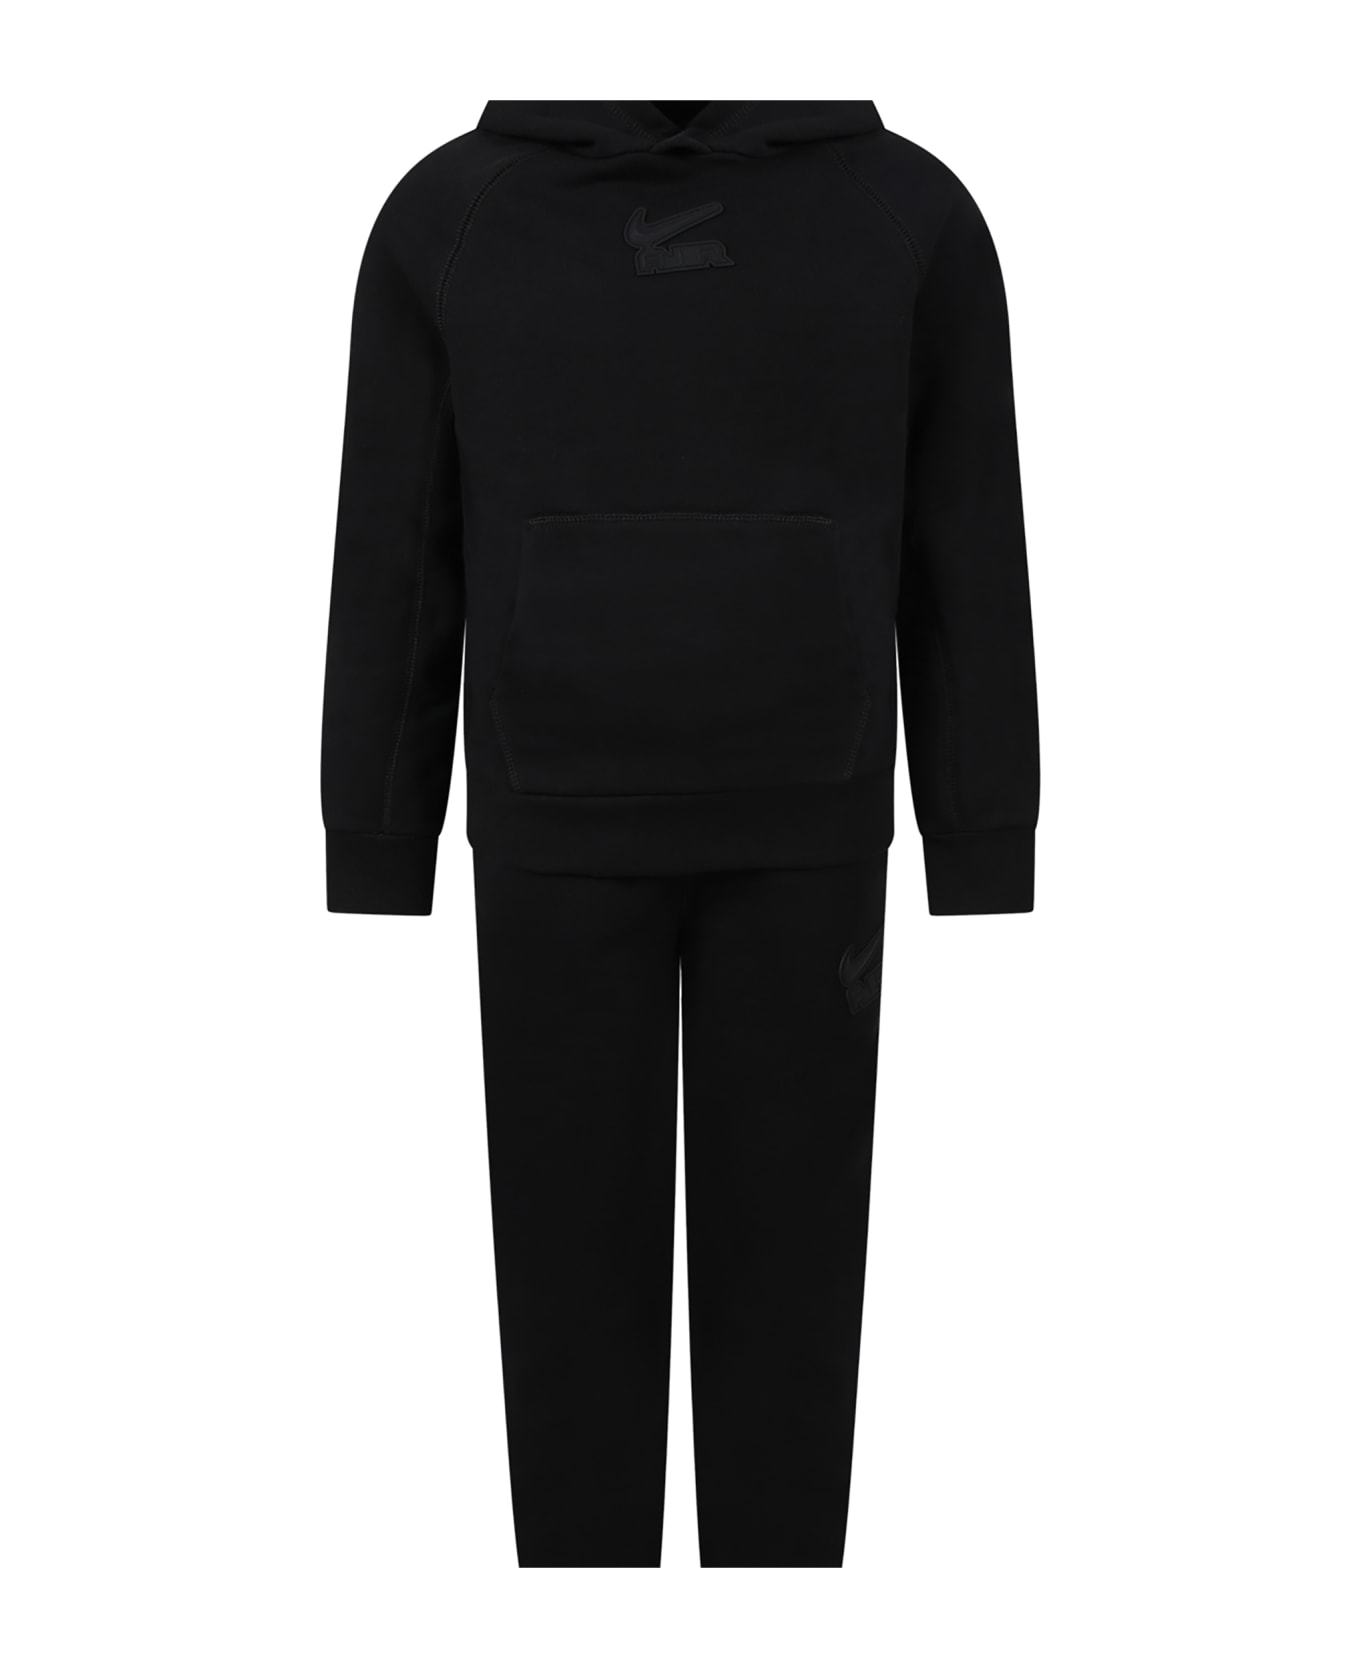 Nike Black Suit For Boy With Logo - Black